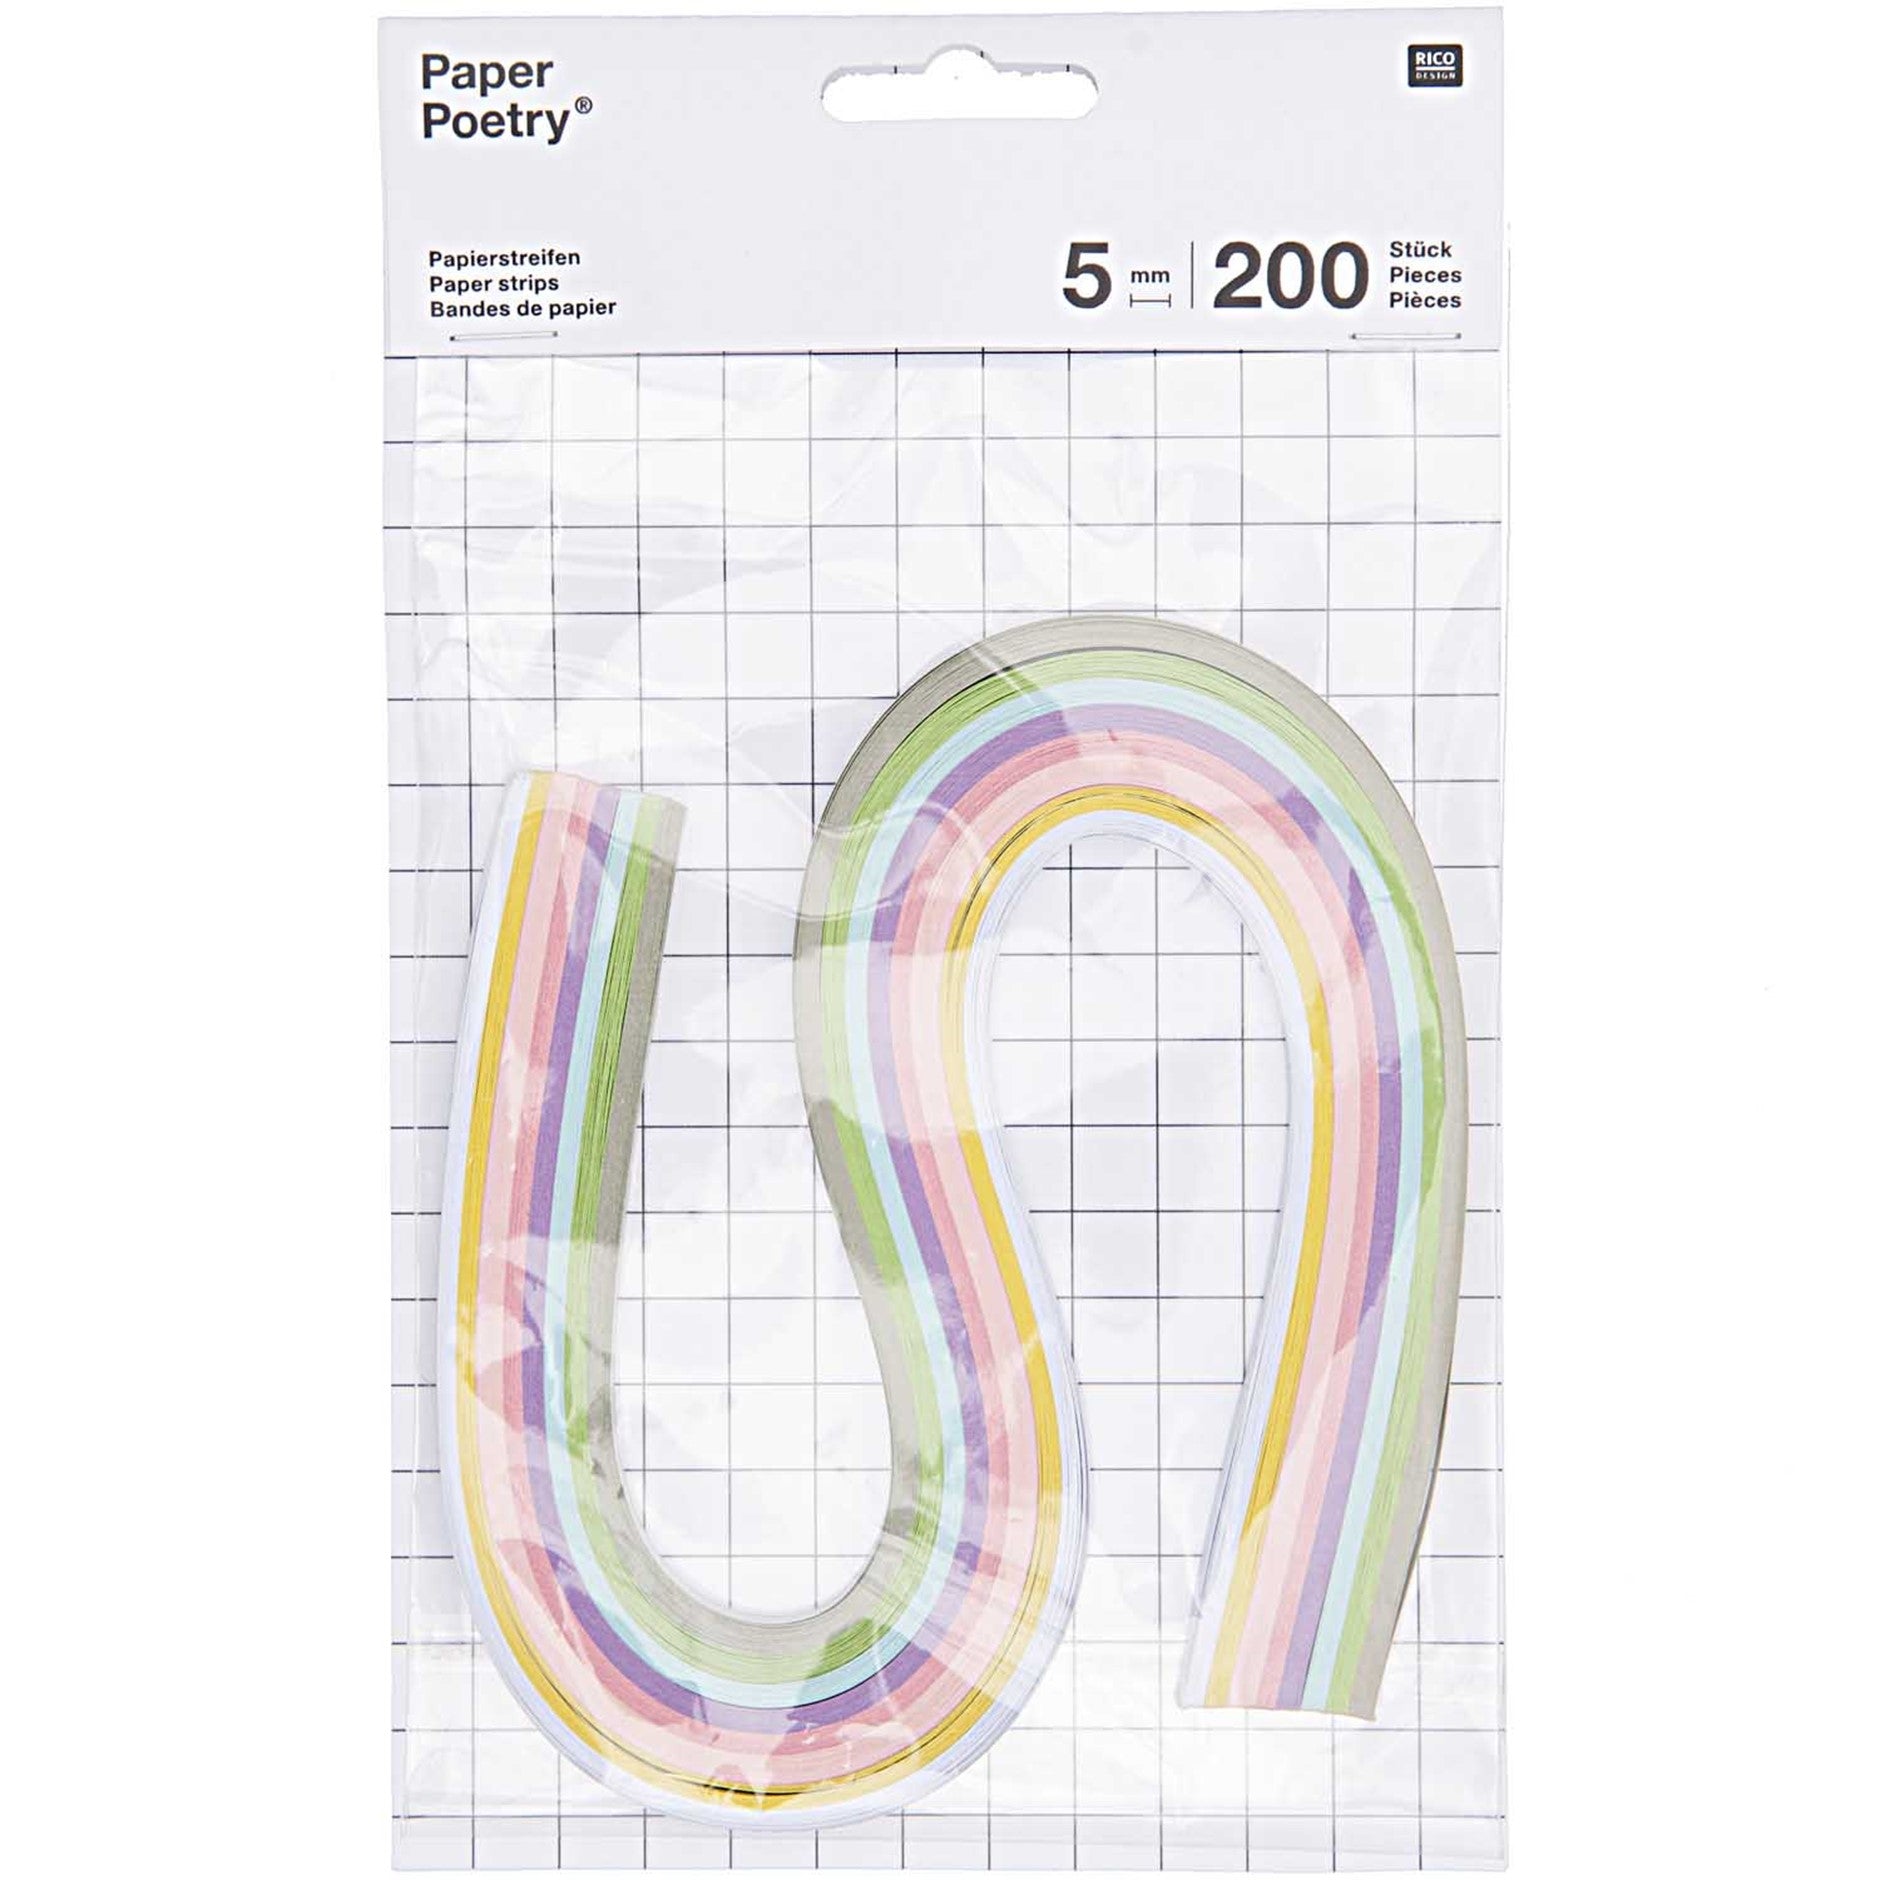 Paper Poetry Quilling Papers: 5mm Strips - 200pc